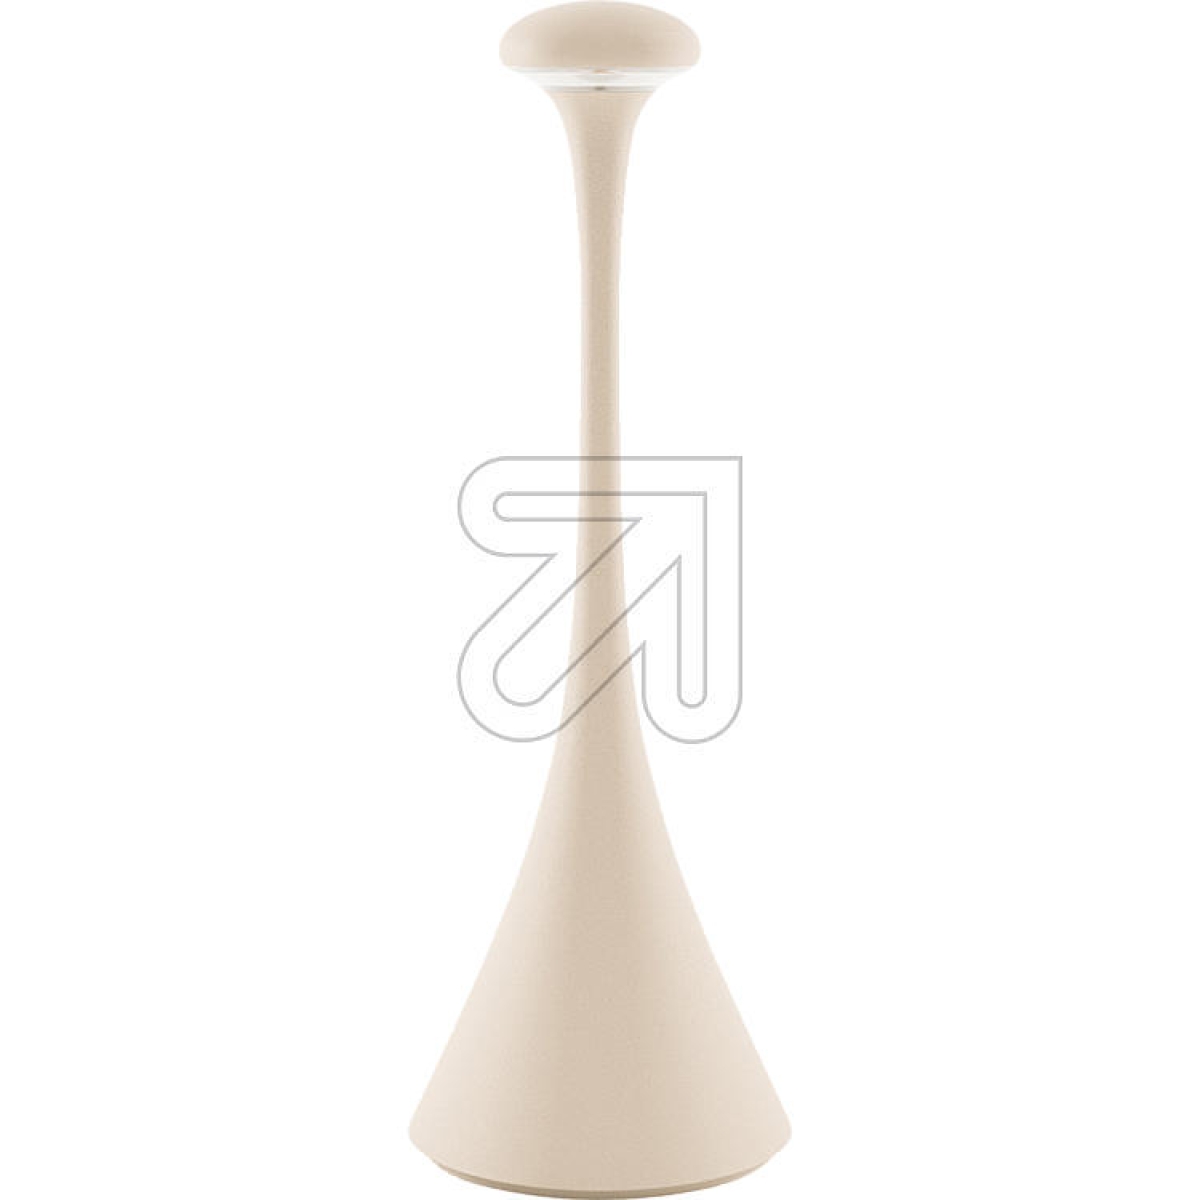 SIGORLED battery-powered table lamp Nudrop dune beige 4540401Article-No: 644155